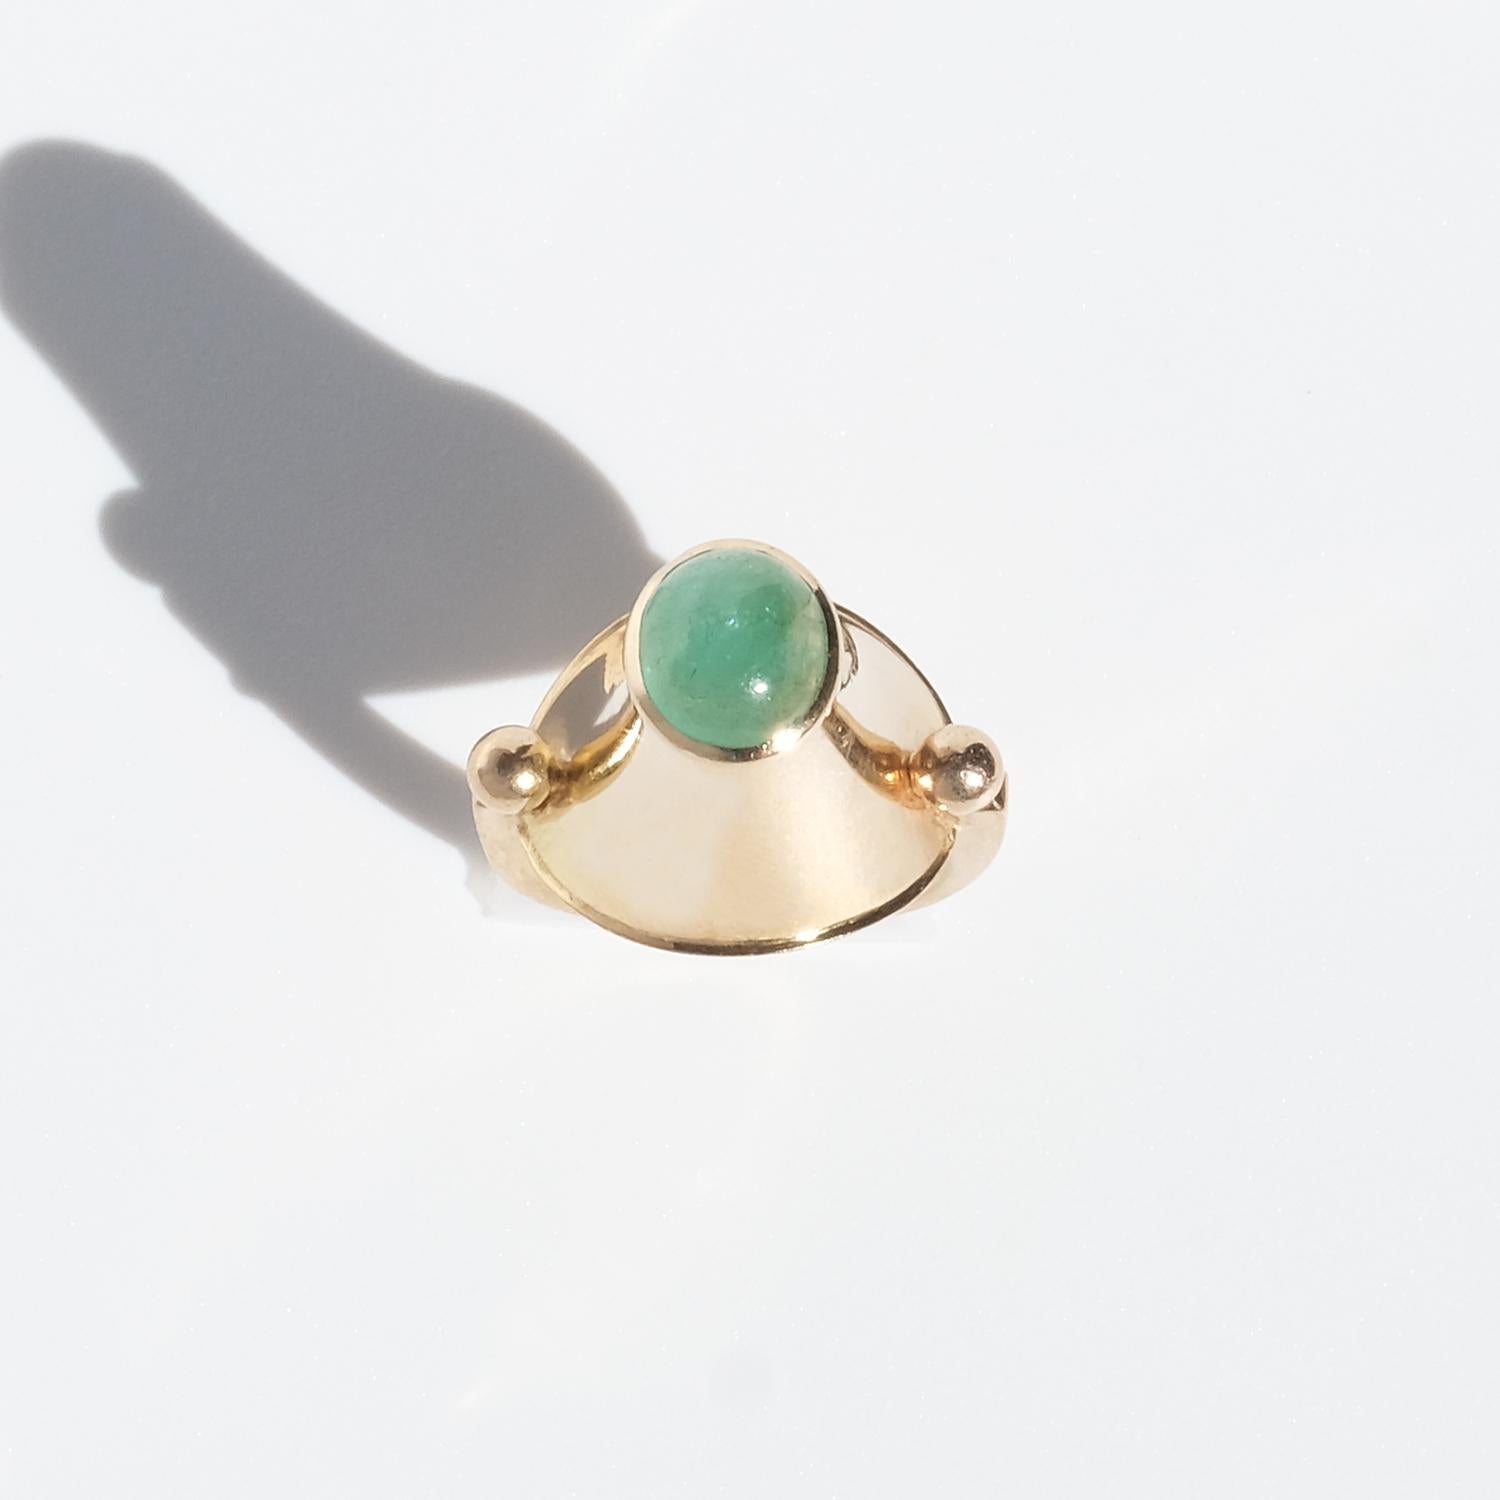 Swedish 18 K Gold Ring with an Emerald Made in 1966, Sigurd Persson 3